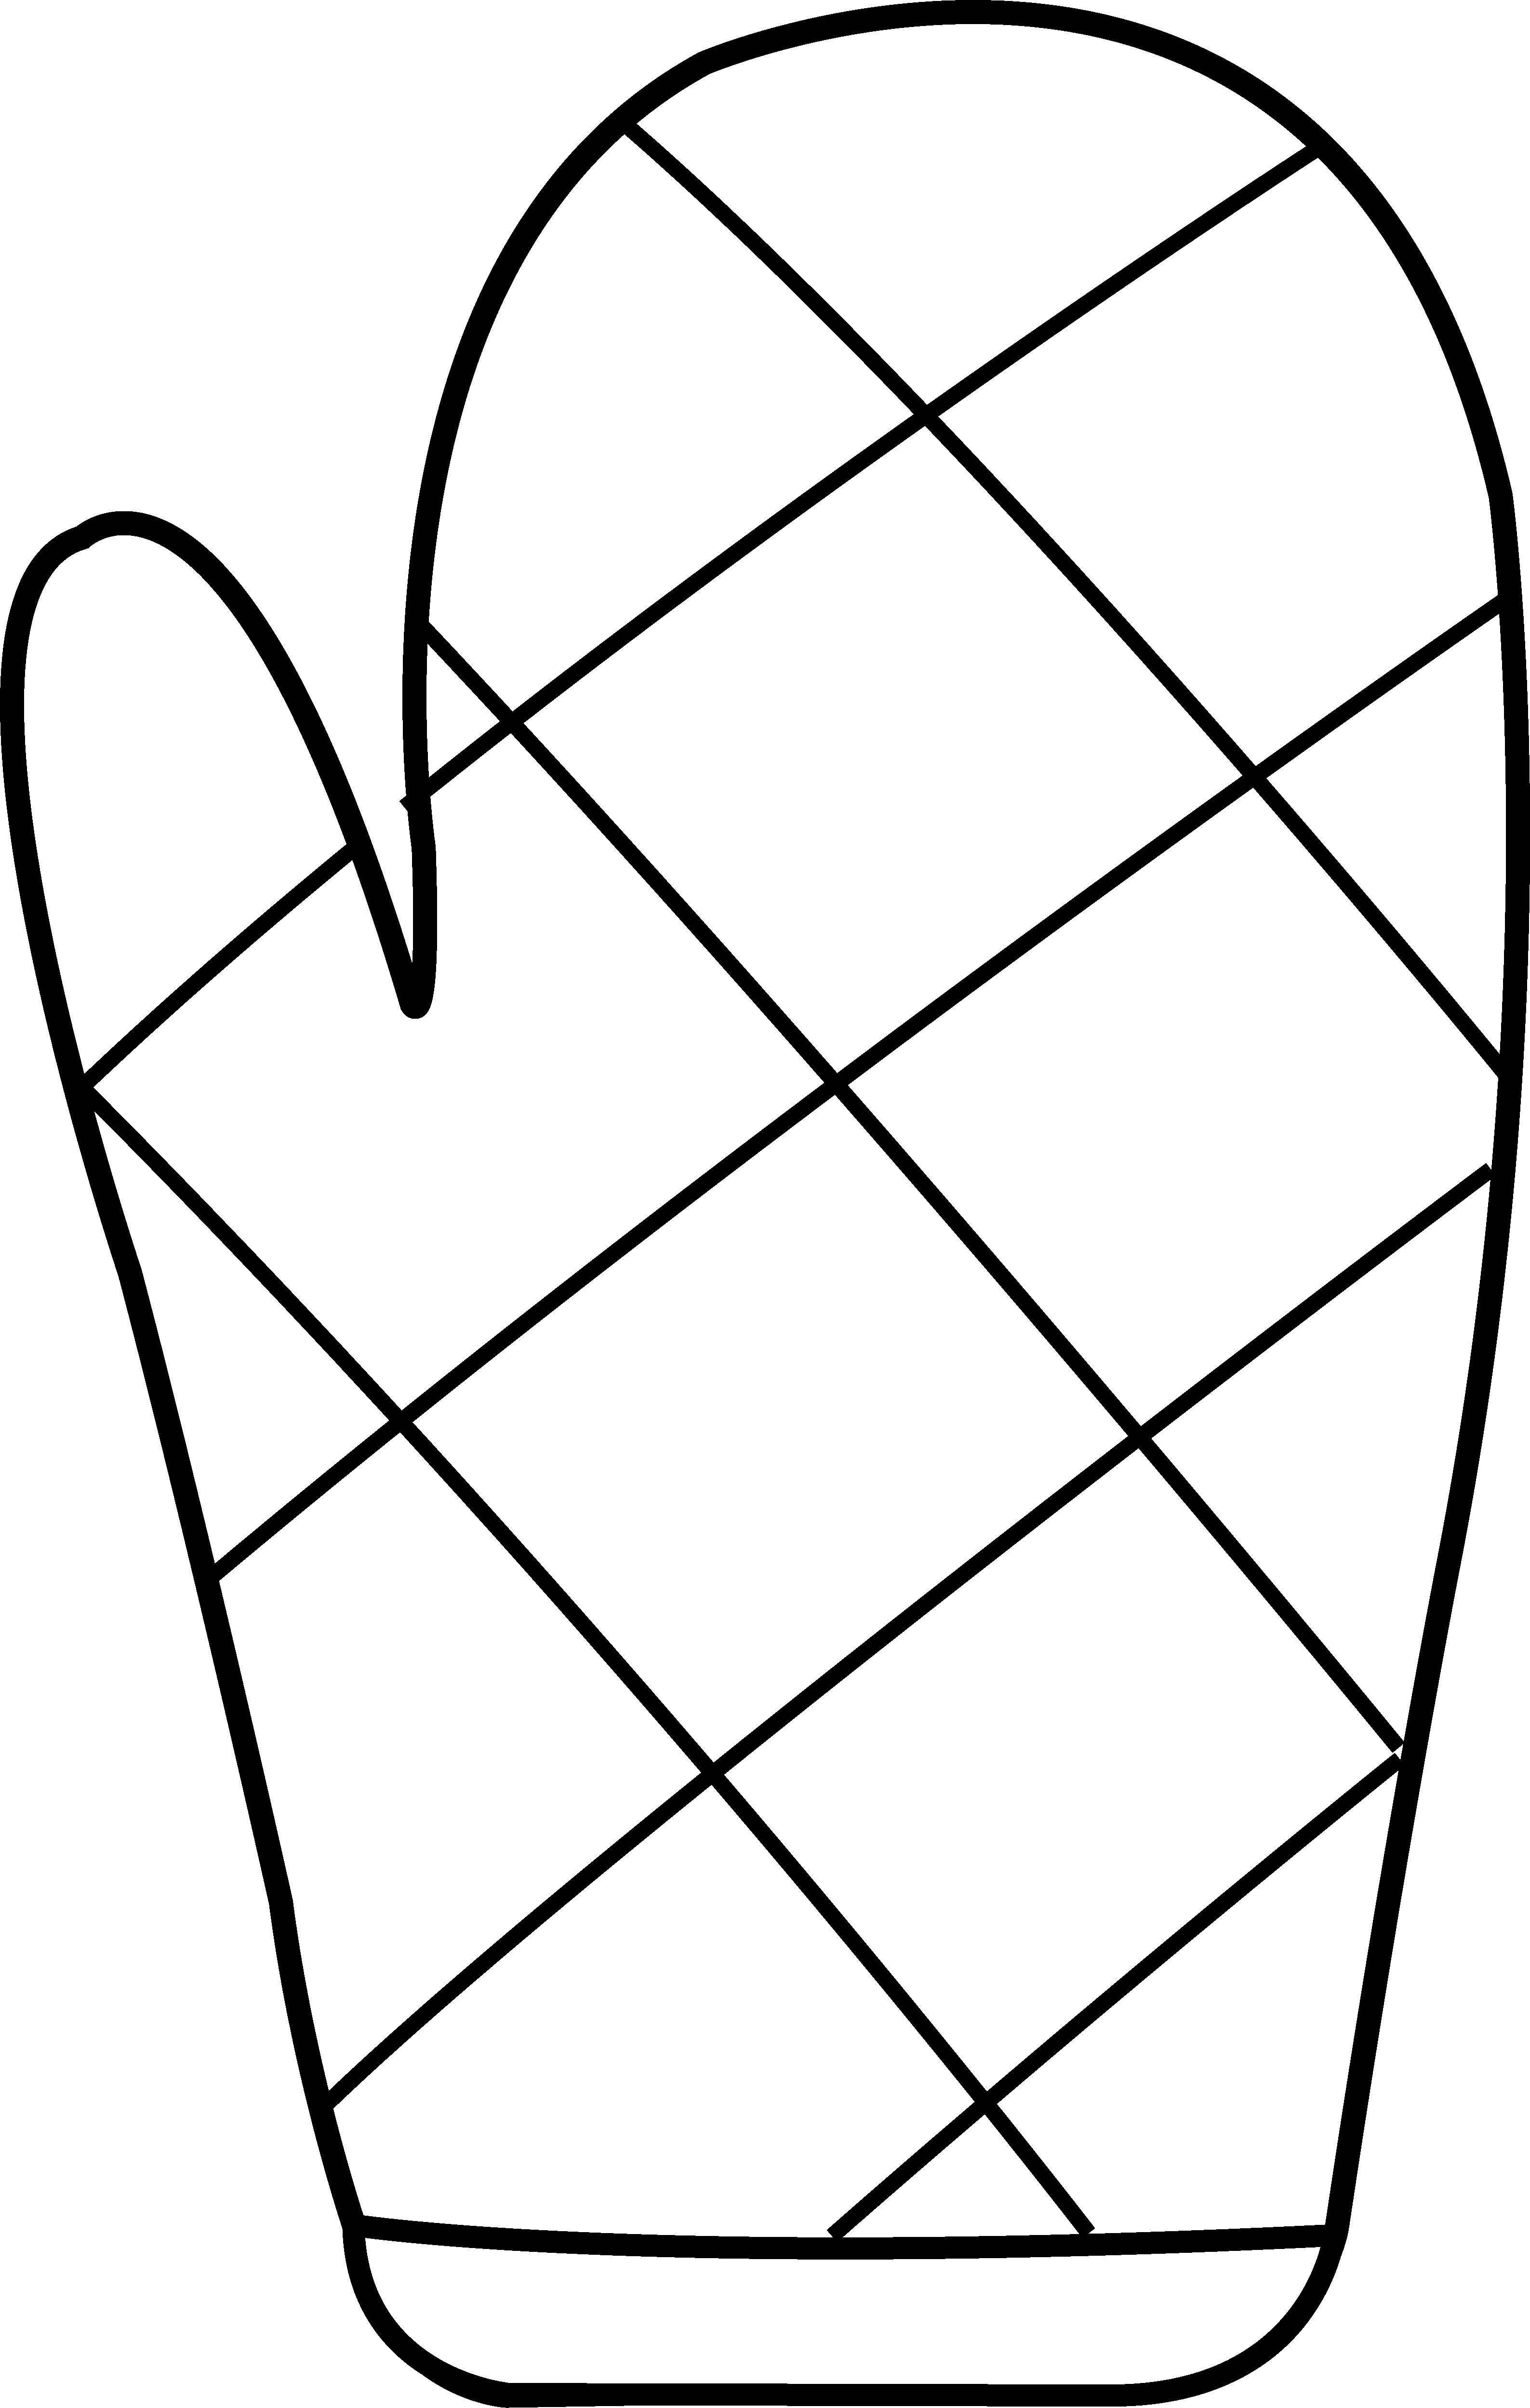 Baking black and white. Glove clipart mittons